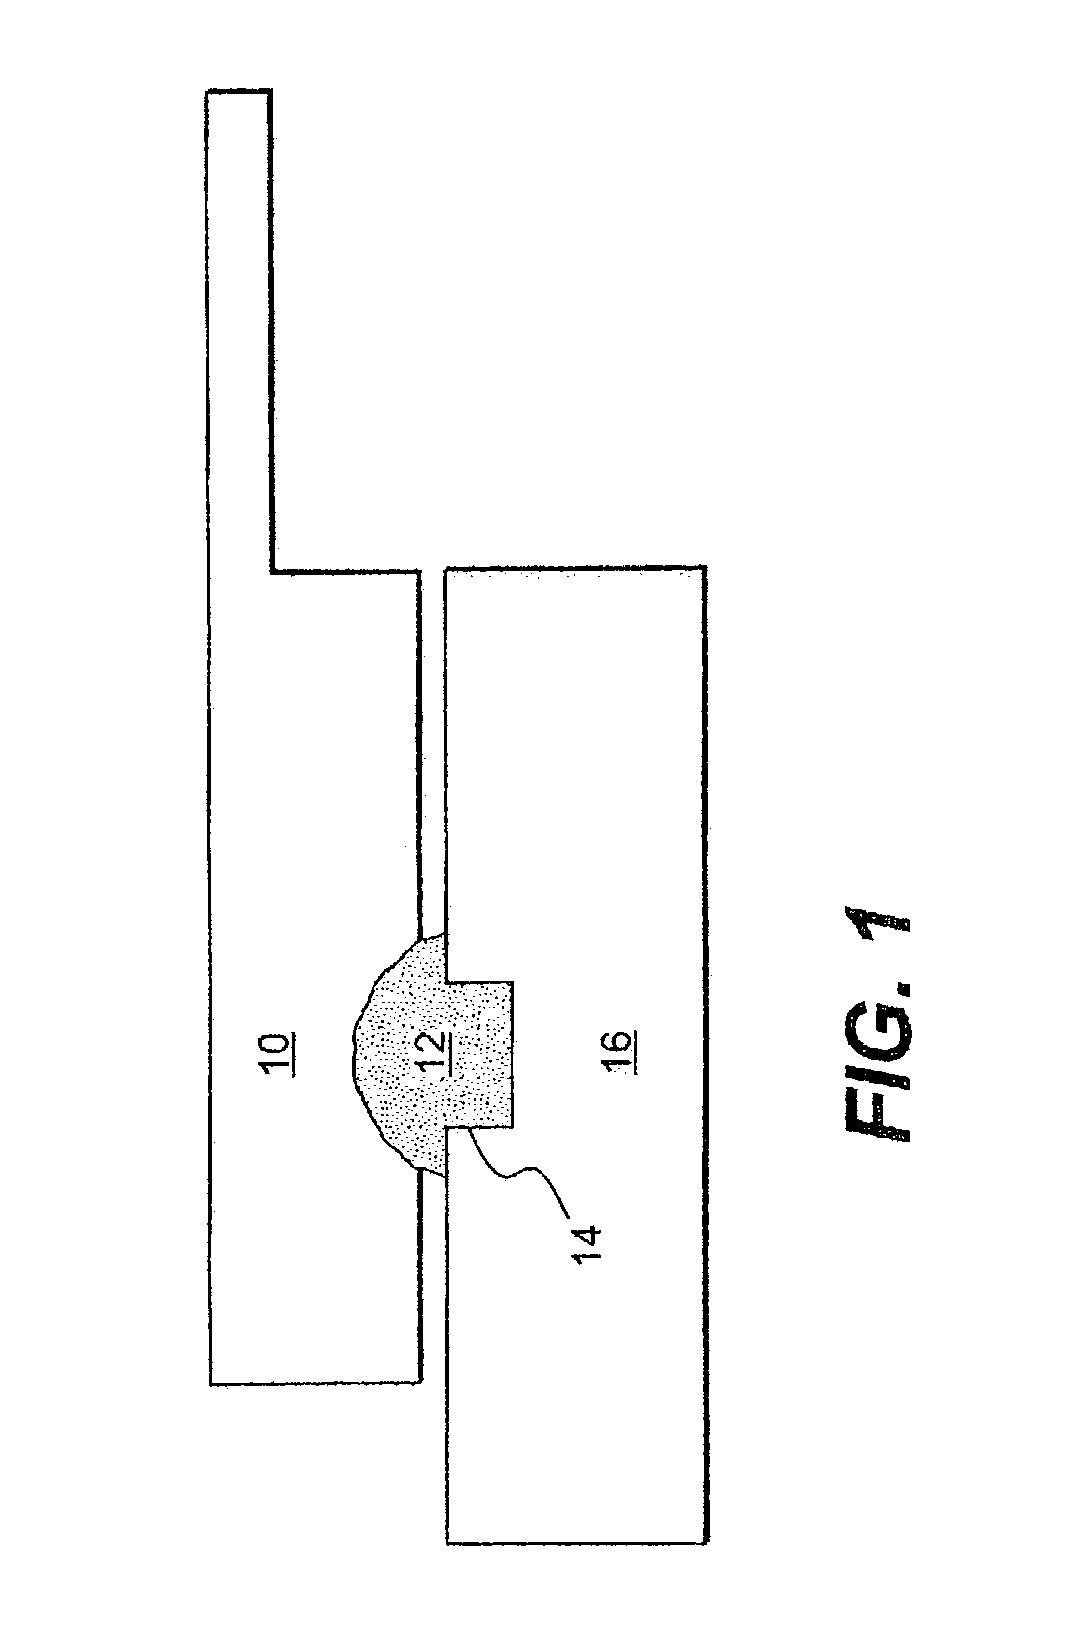 Methods for making and using high explosive fills for very small volume applications